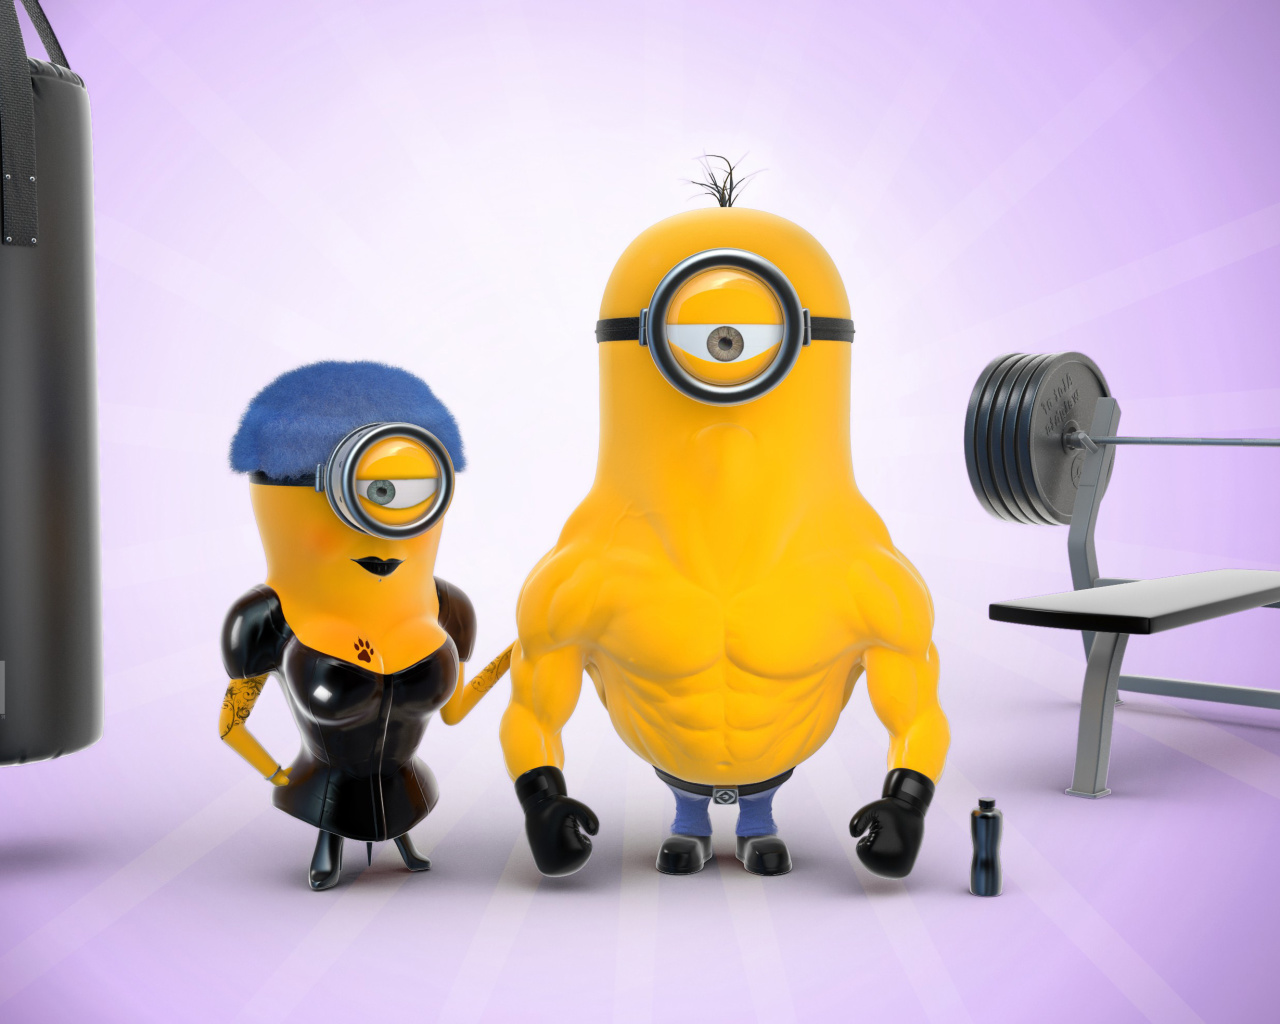 Despicable Me 2 in Gym screenshot #1 1280x1024